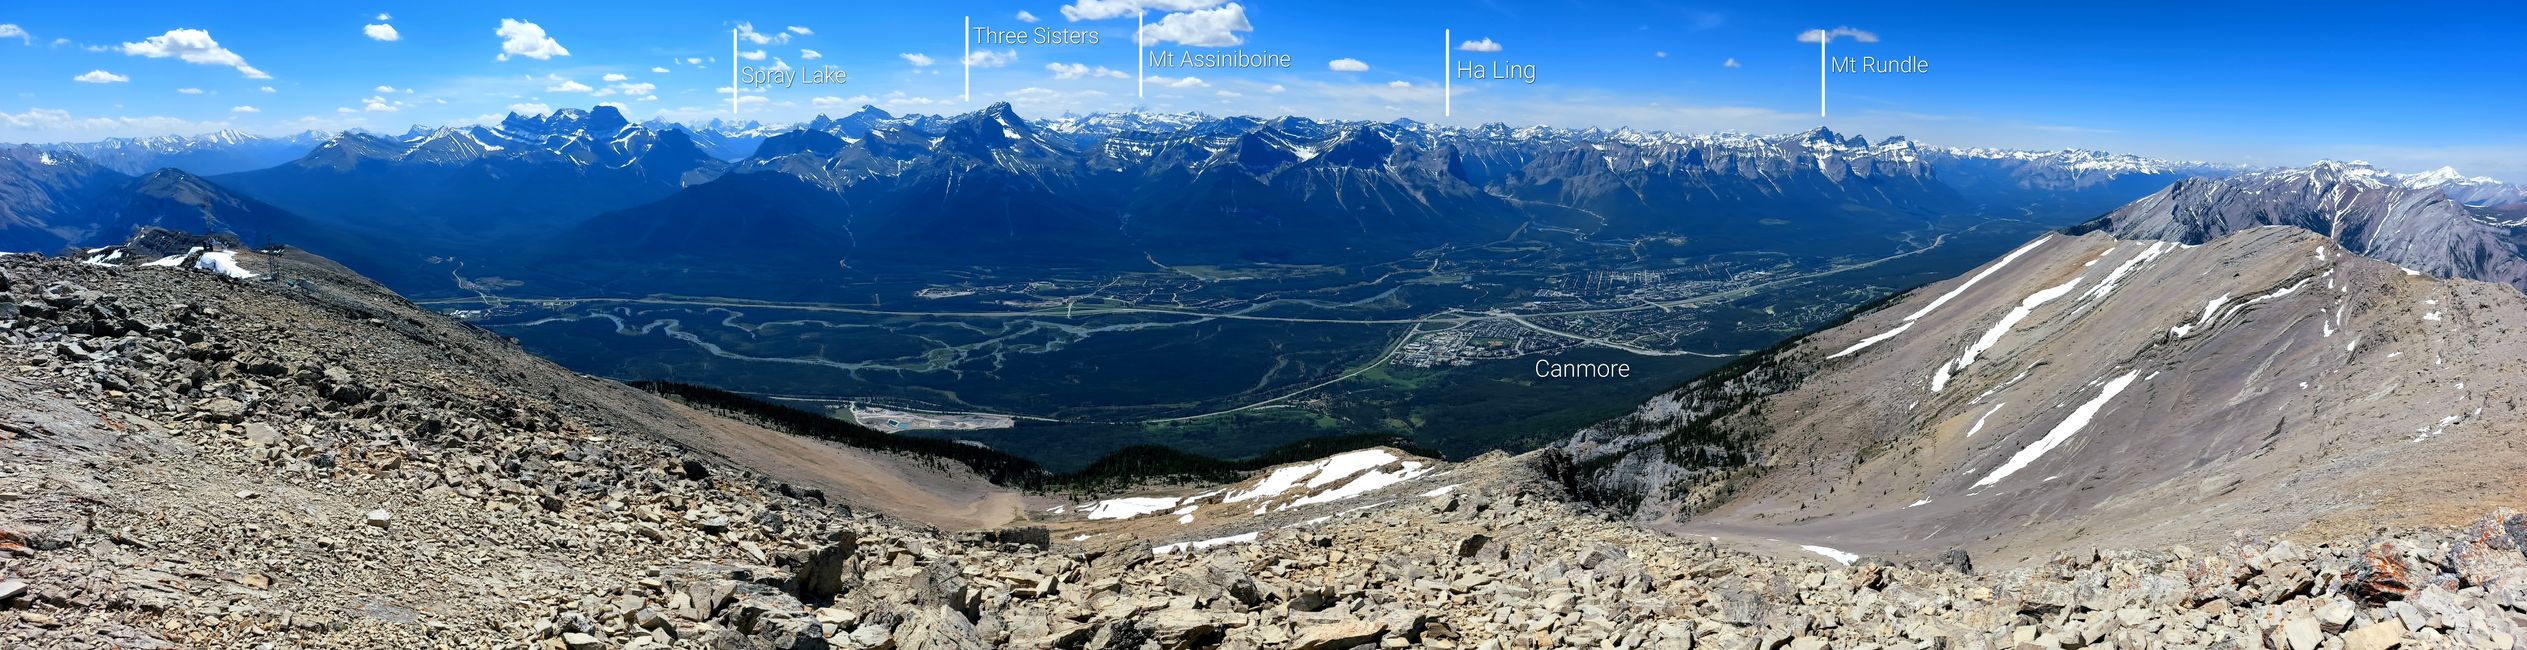 Stunning panorama from the top of Grotto Mountain